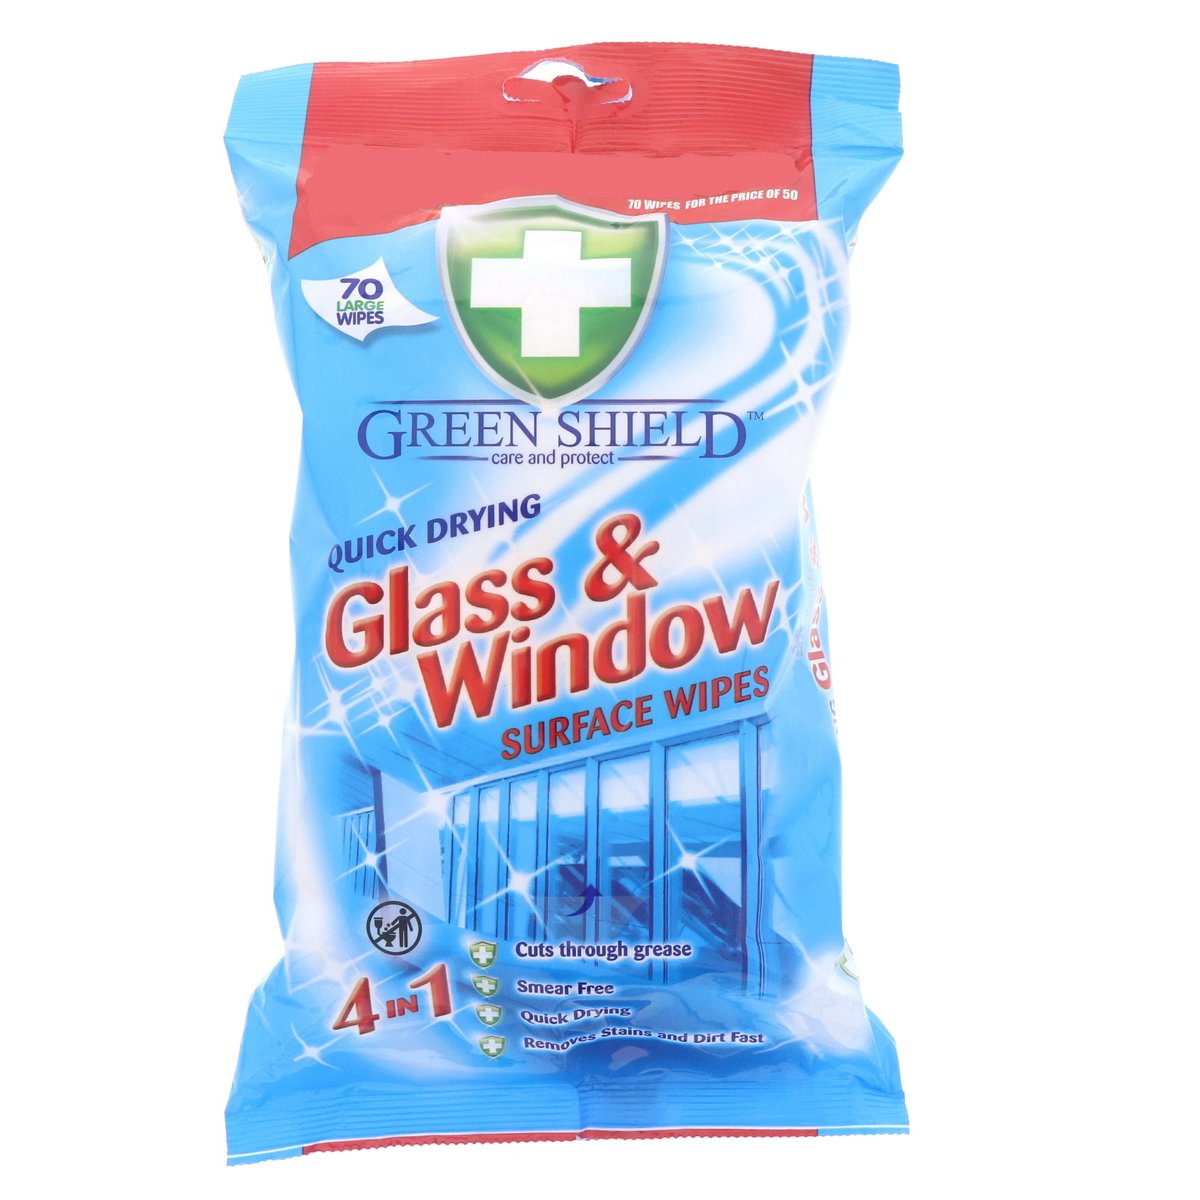 SET OF 3] Greenshield Glass & Window Wipes 70's household wet wipes